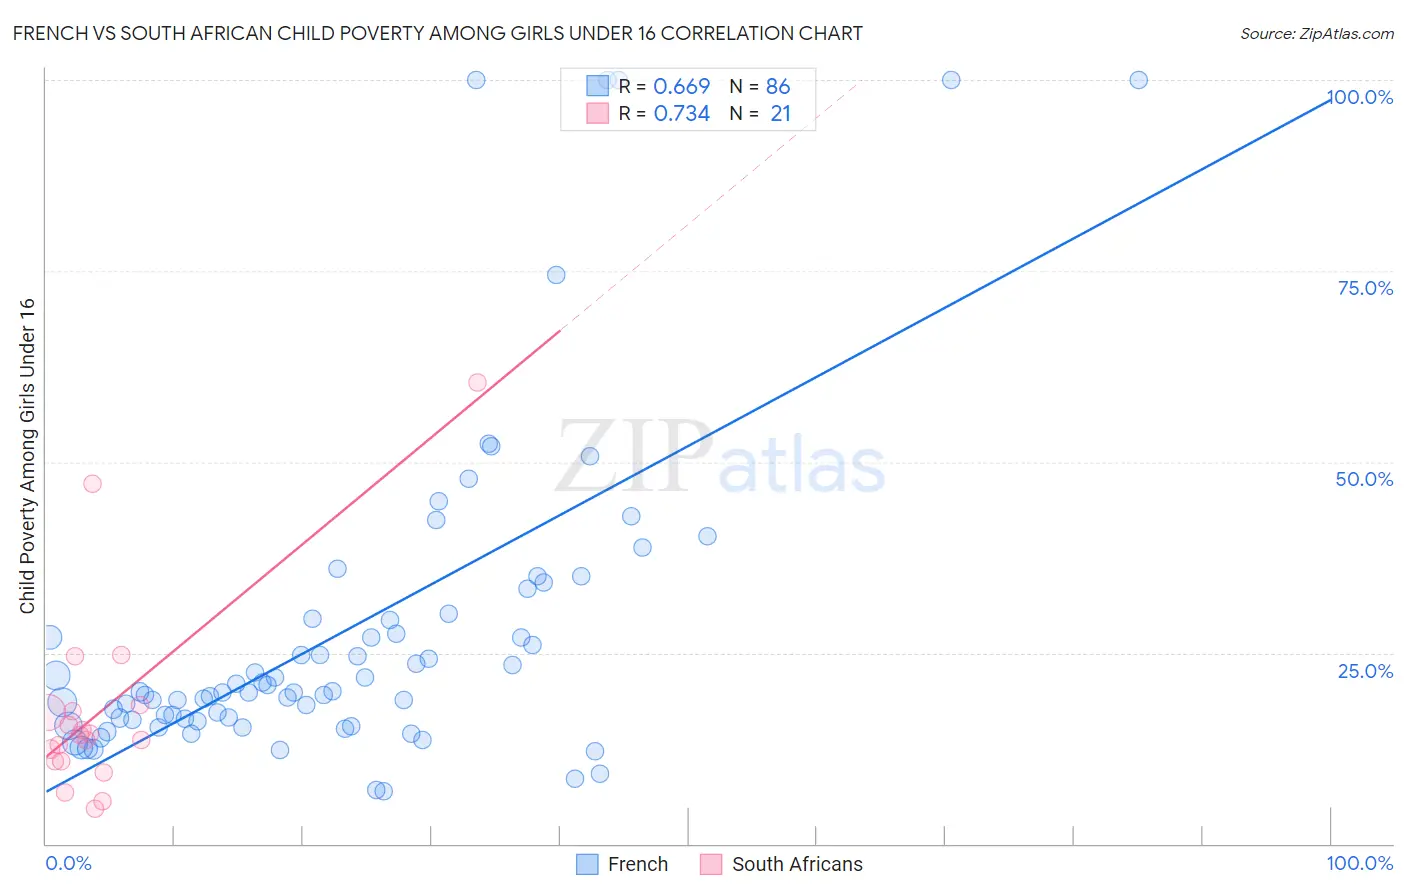 French vs South African Child Poverty Among Girls Under 16